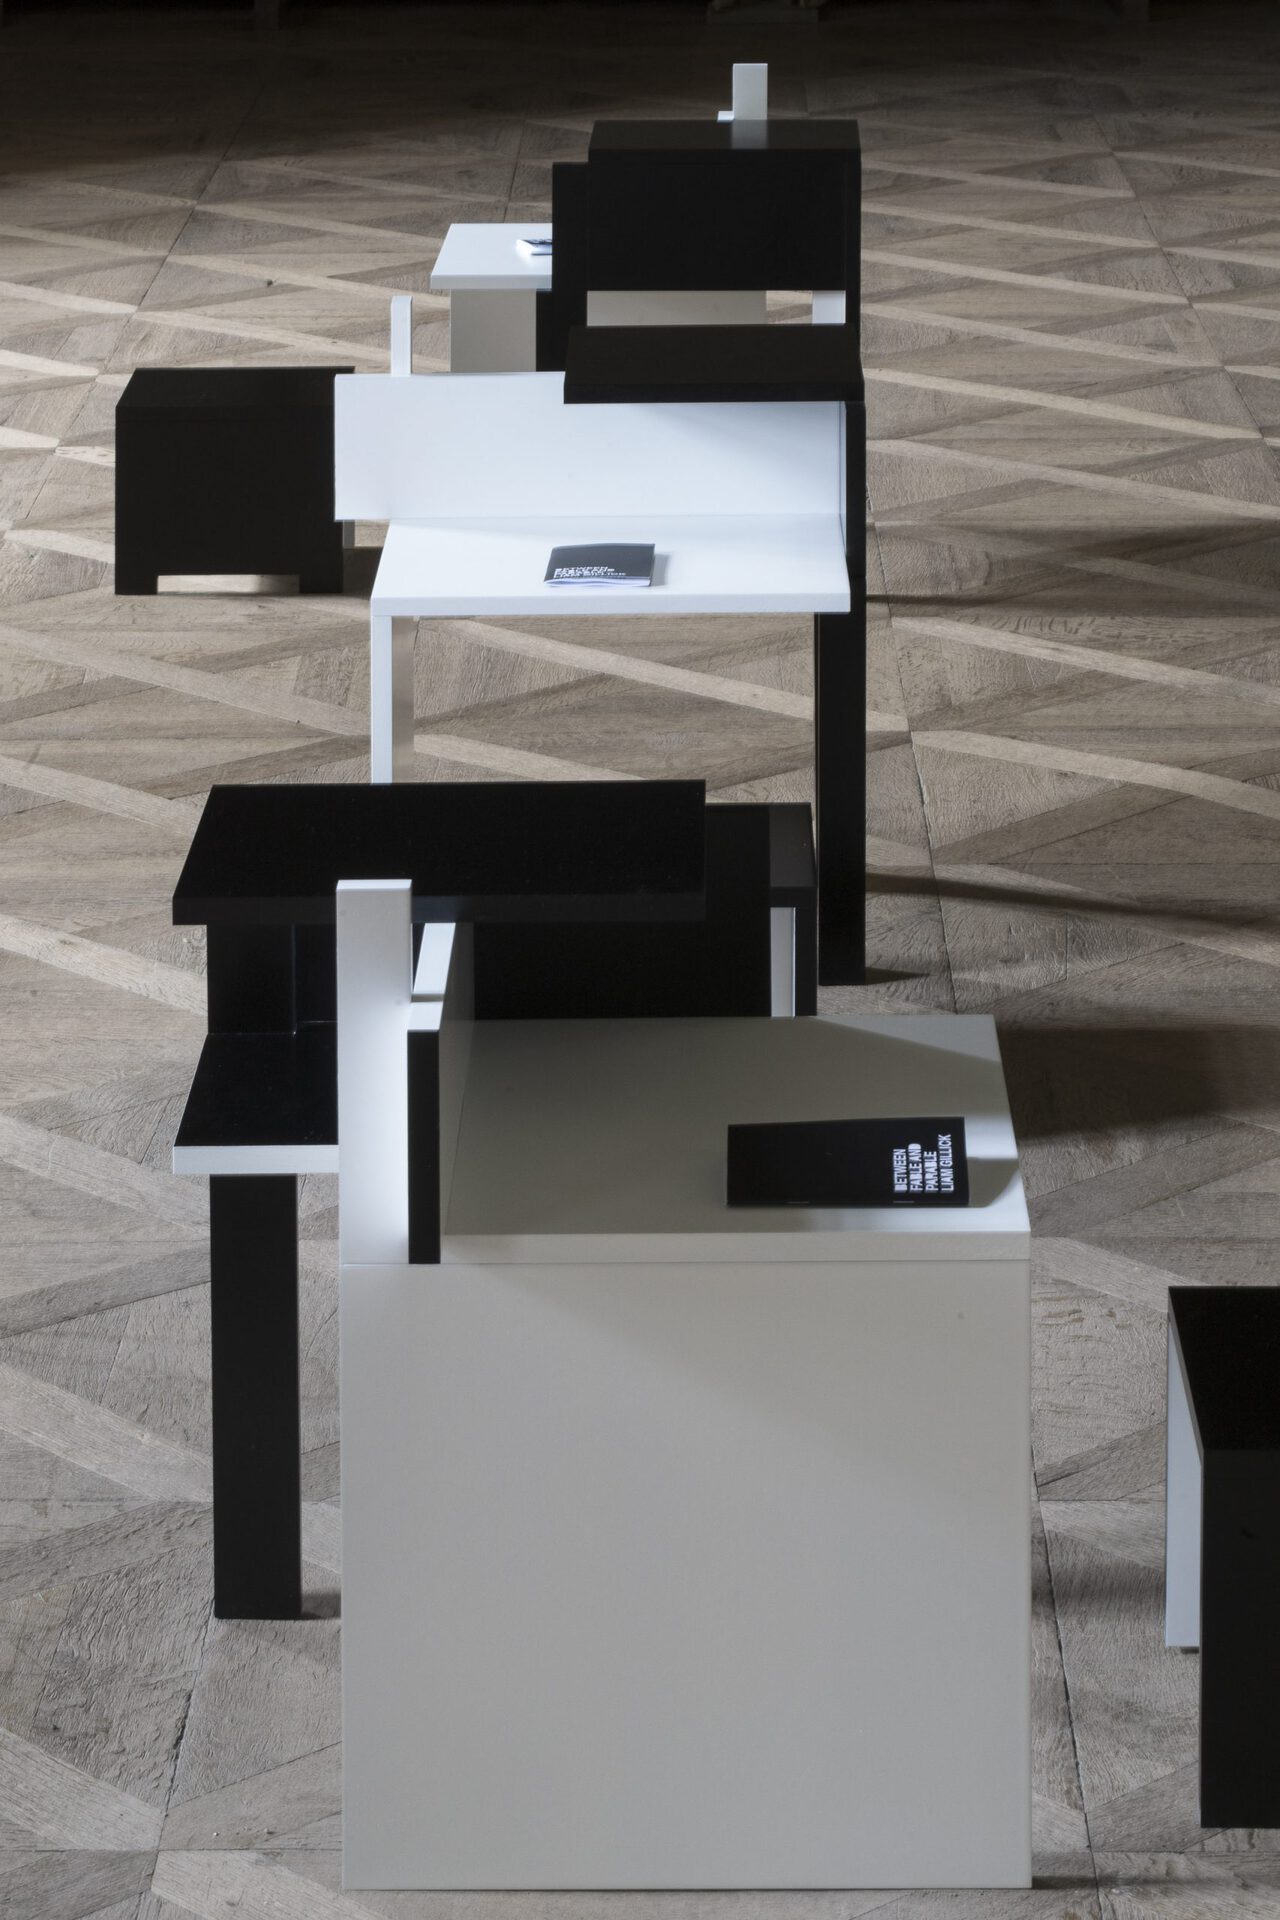 Liam Gillick, Three Borrowed Gray Rotations, 2021  painted lacquered MDF 65 × 50 × 50 cm (desk) 25 × 30 × 30 cm (stool)  detail courtesy of the artist and Galerie Meyer Kainer, Vienna